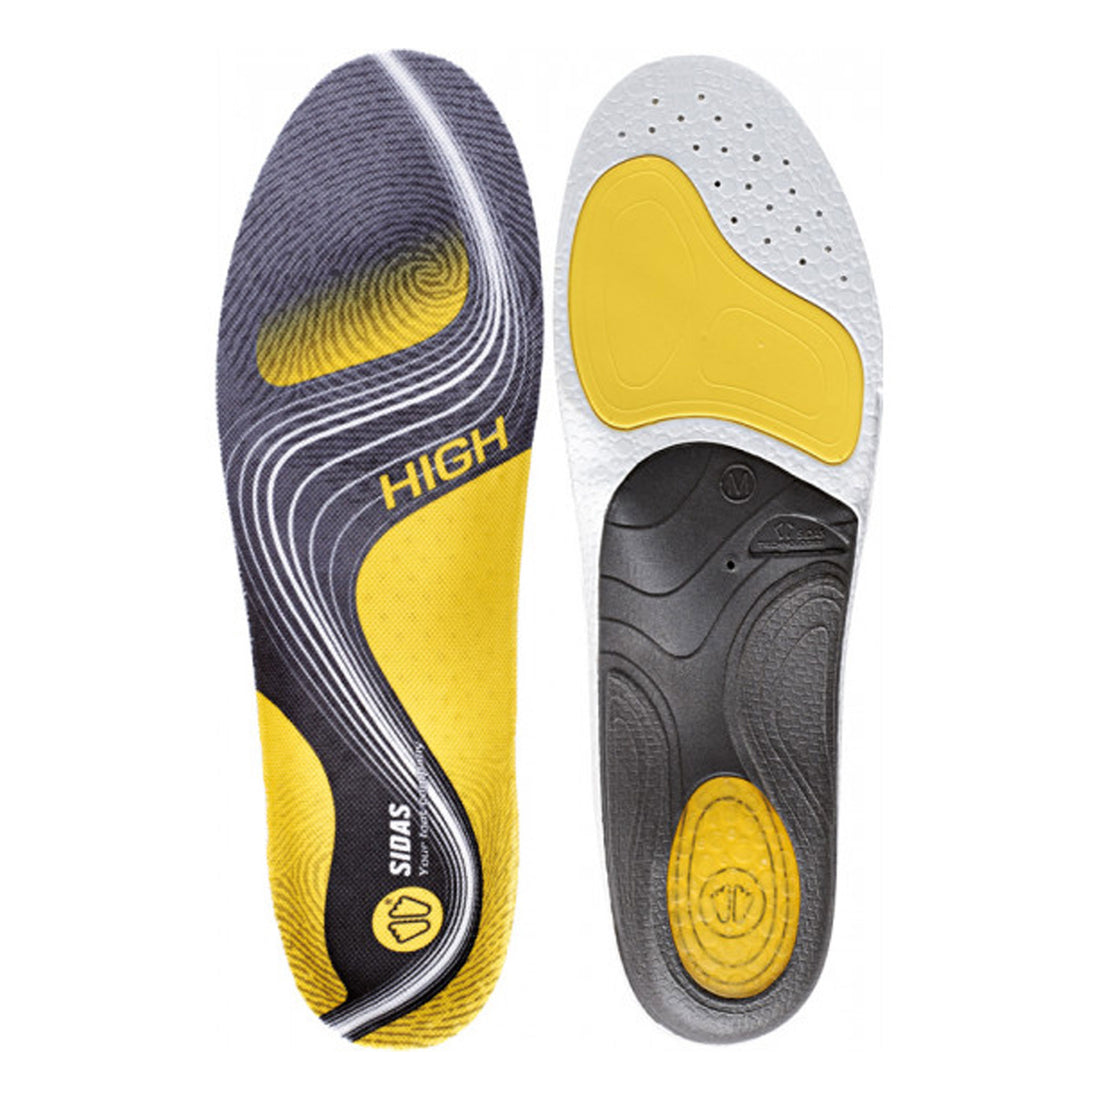 3feet Activ High Insoles - Yellow